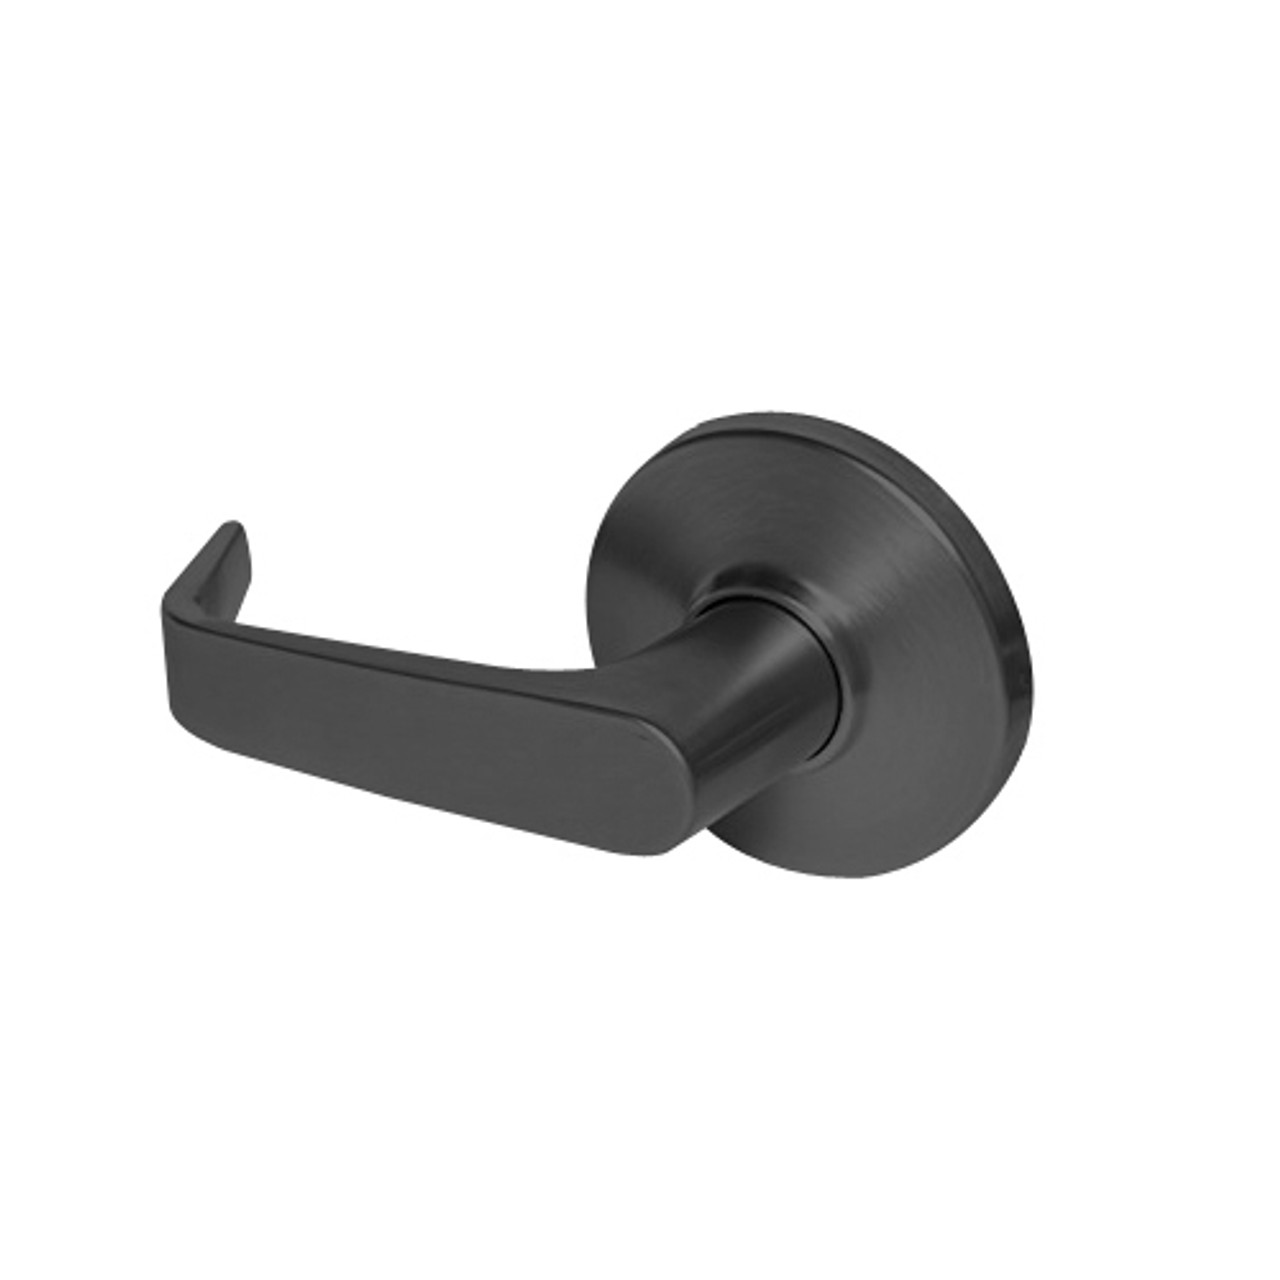 9K30Q15DSTK622 Best 9K Series Exit Heavy Duty Cylindrical Lever Locks with Contour Angle with Return Lever Design in Black